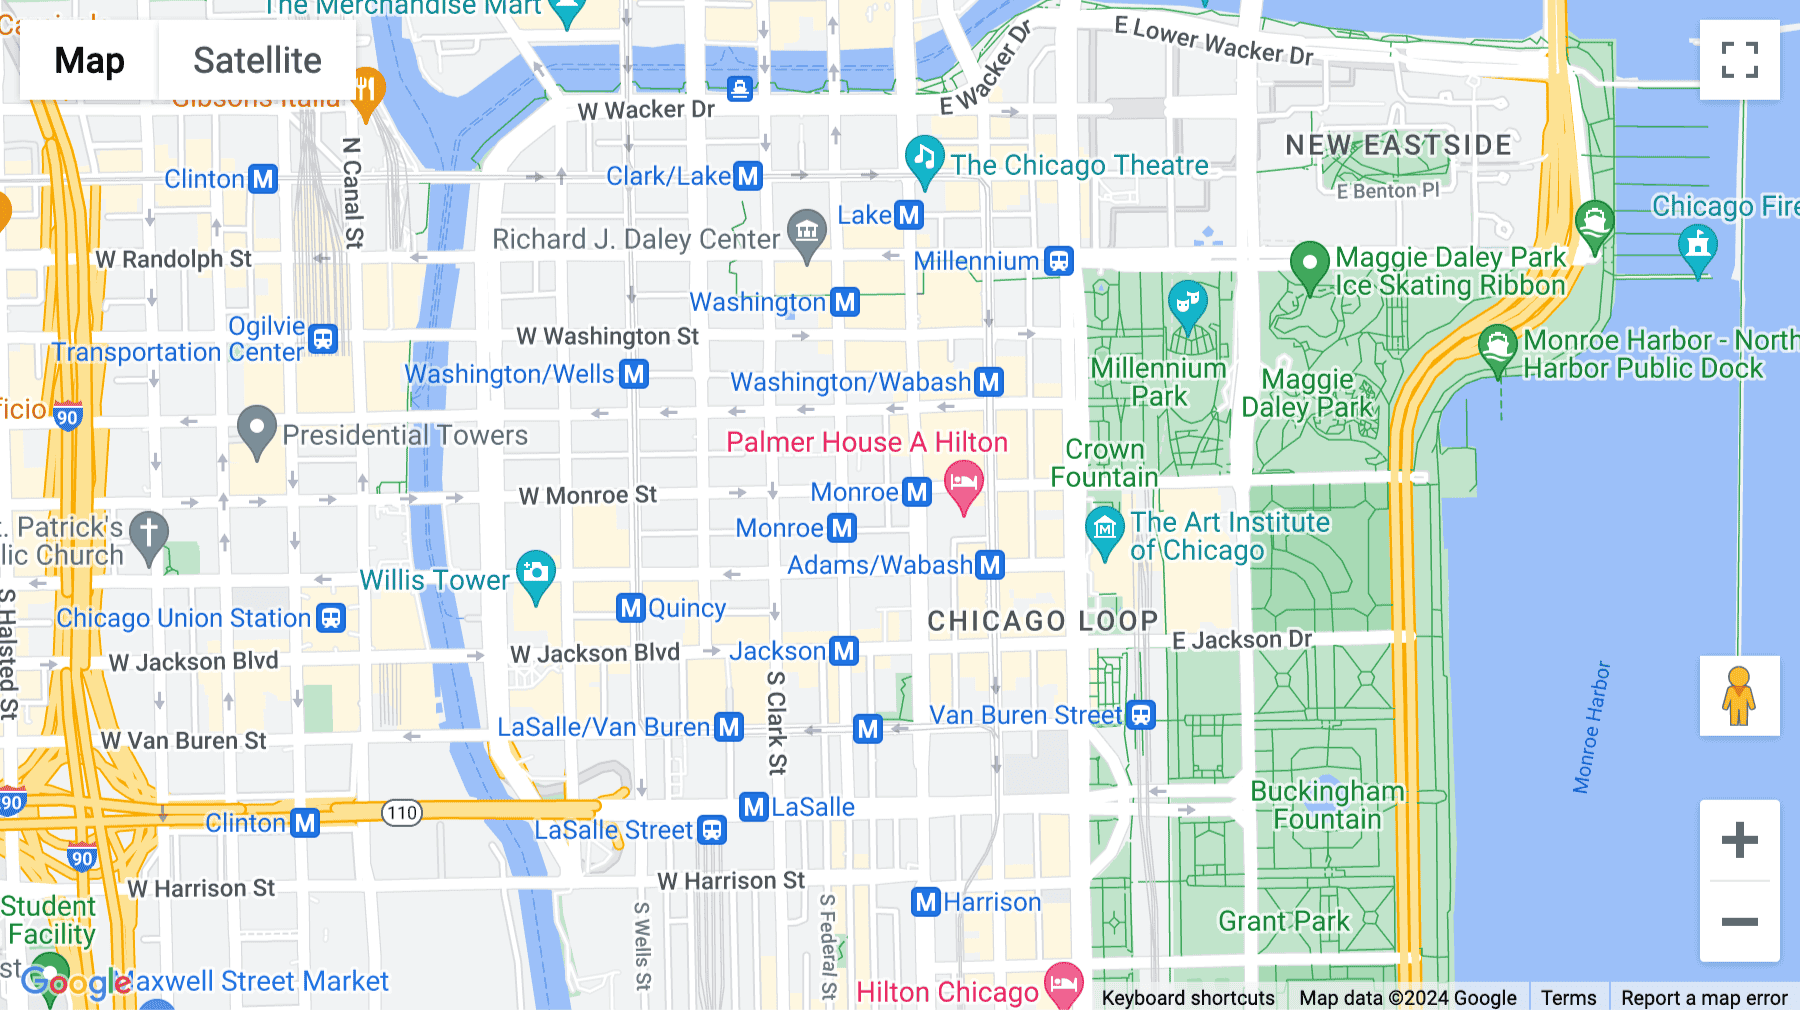 Click for interative map of Chicago Loop, Chicago